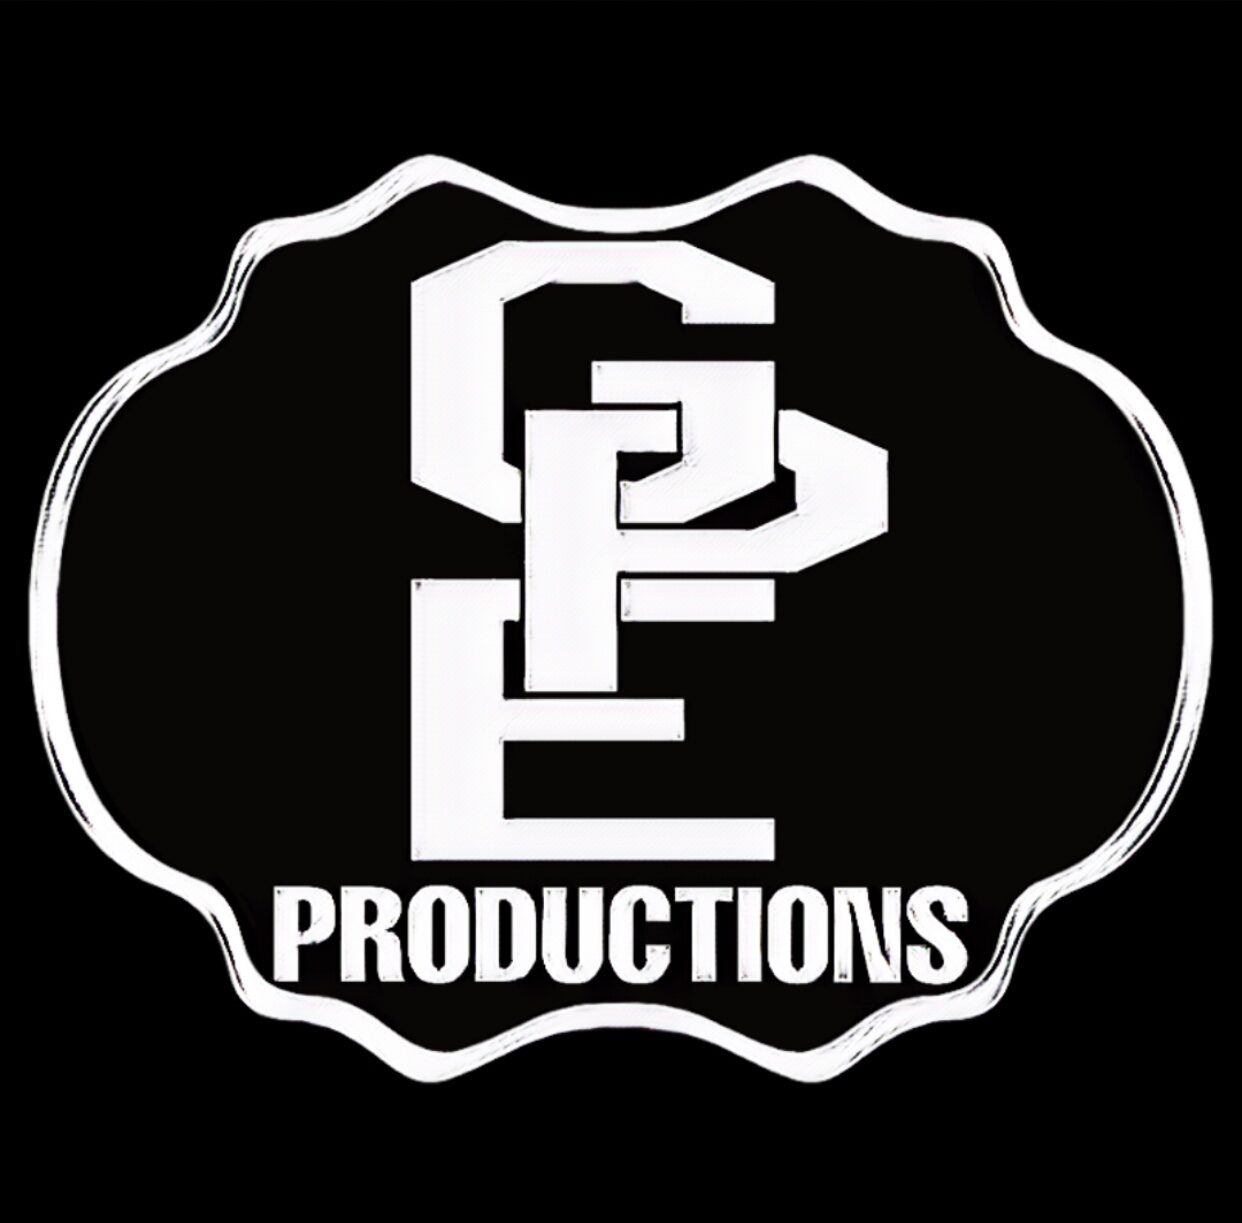 GPE PRODUCTIONS 